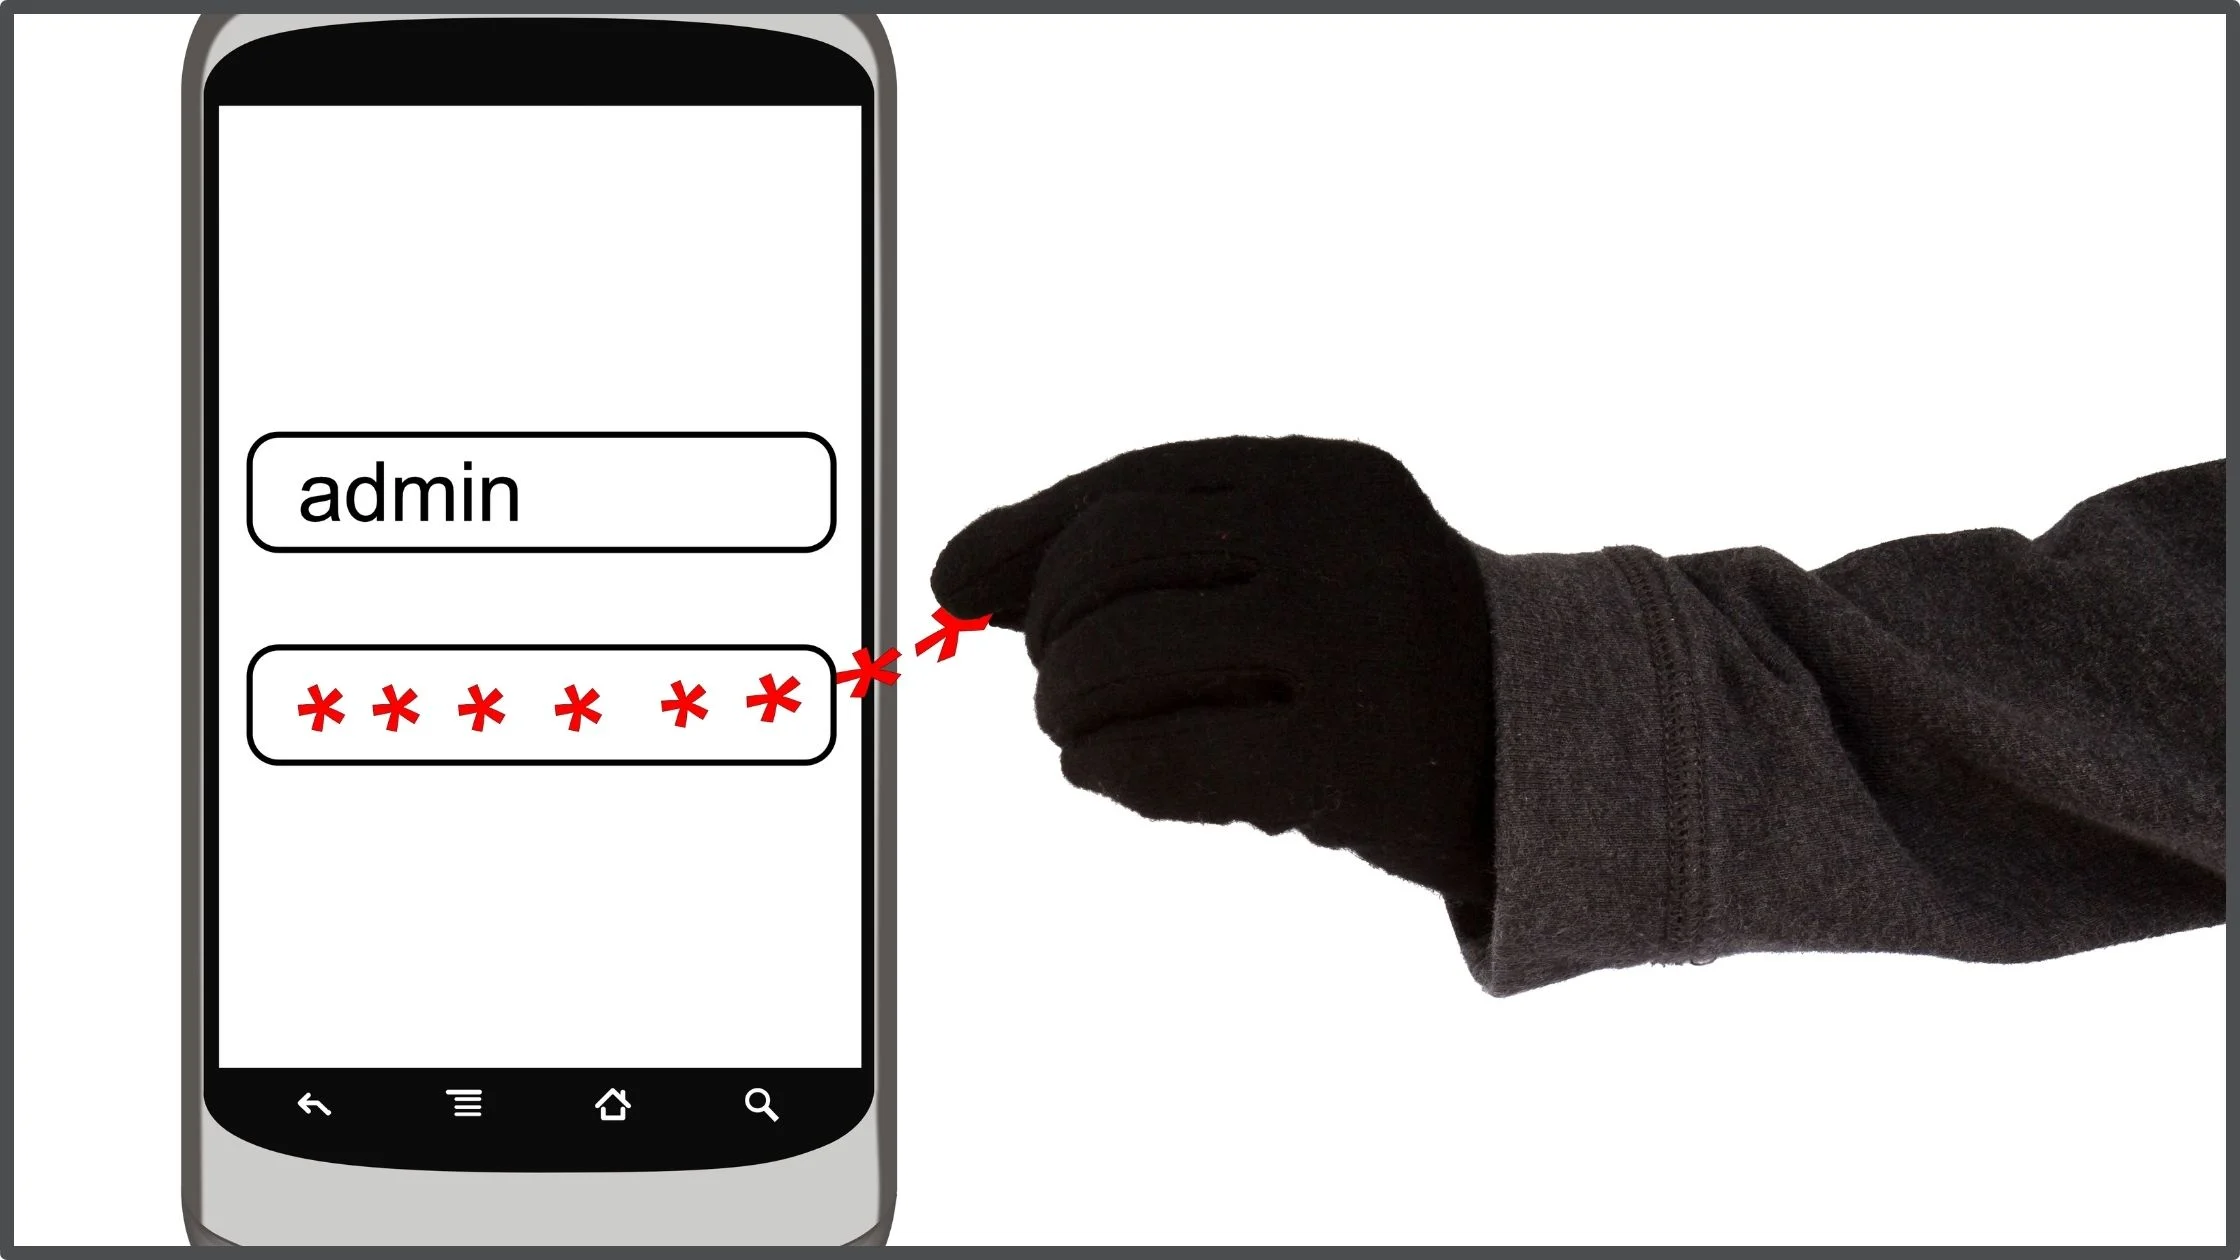 Hand with glove dragging a password out of a password field on a mobile phone